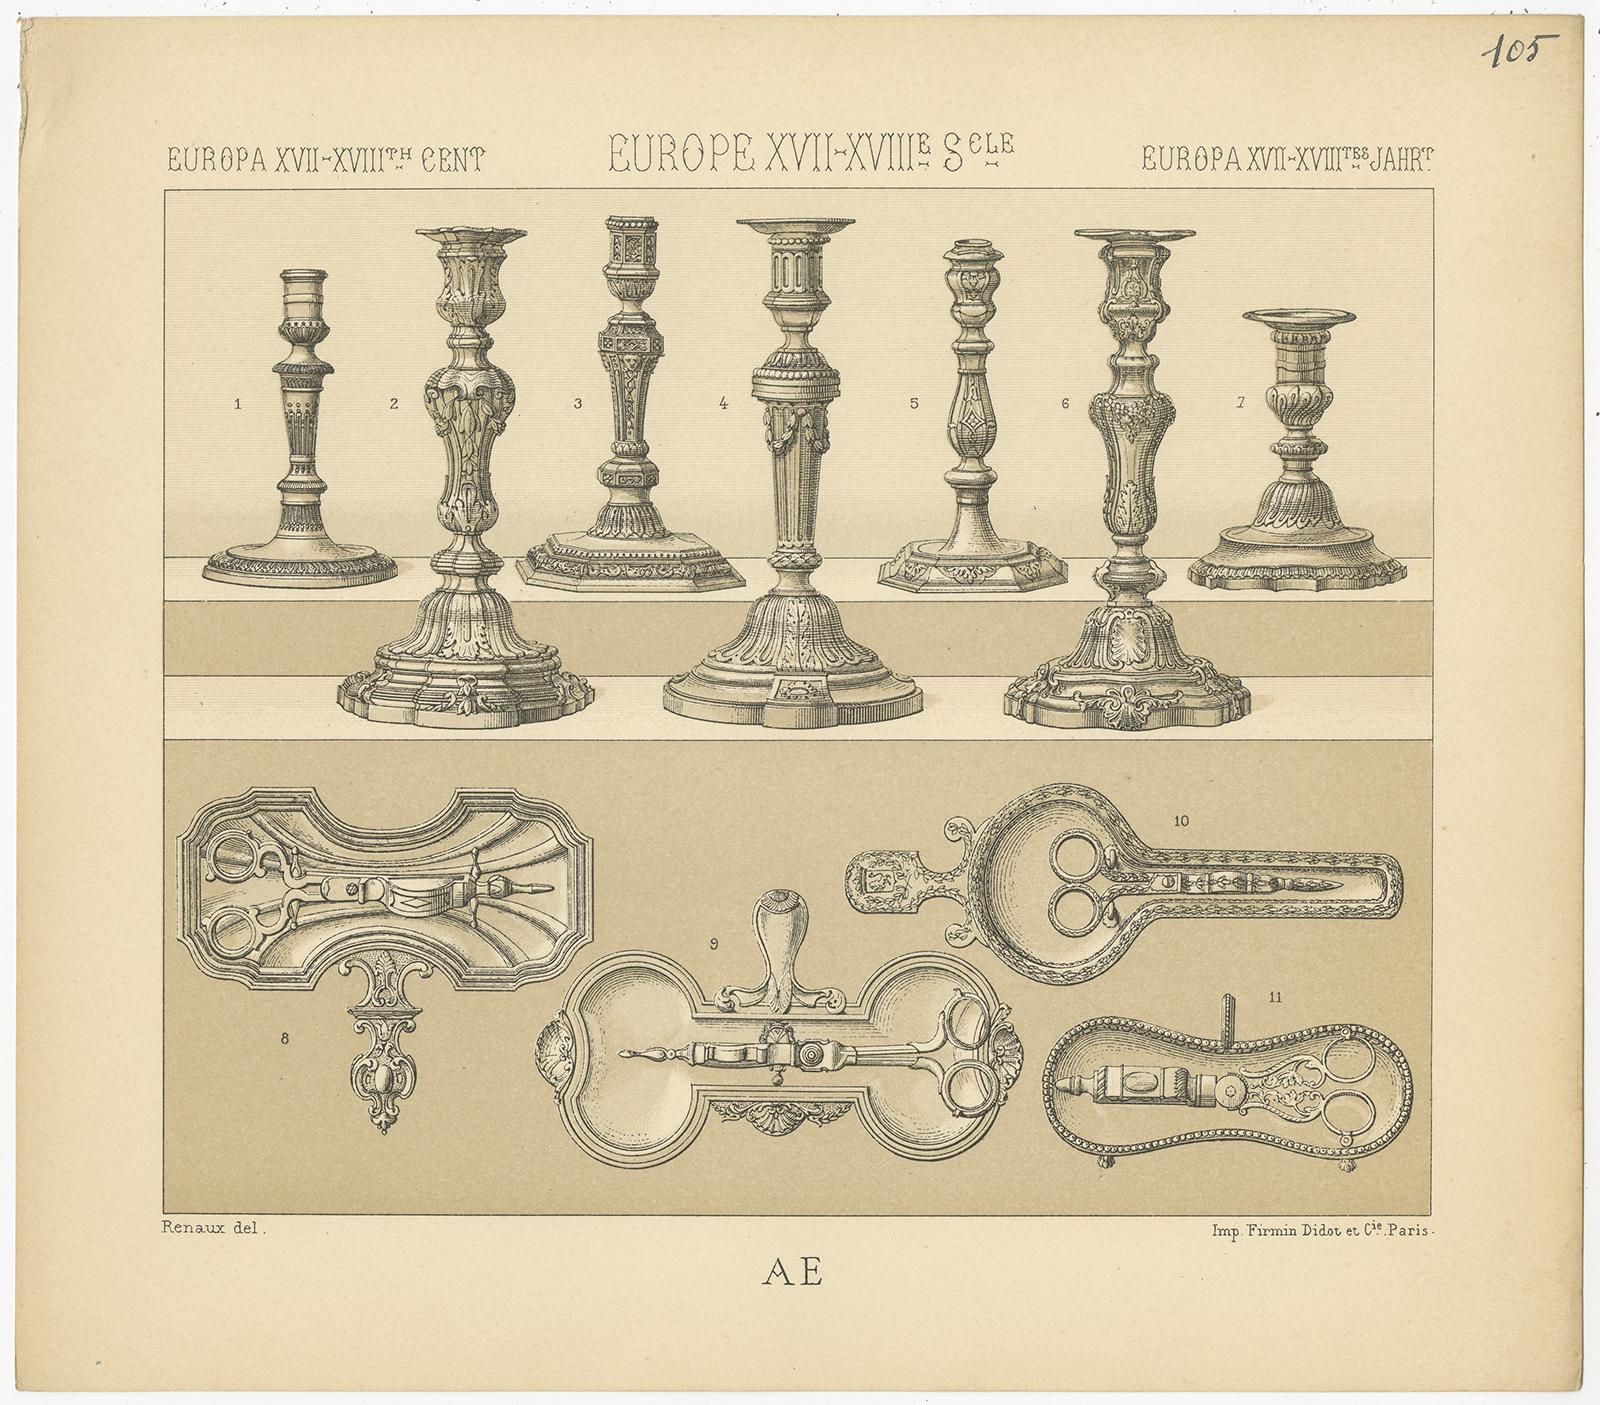 19th Century Pl. 105 Antique Print of European 17th-18th Century Objects by Racinet For Sale